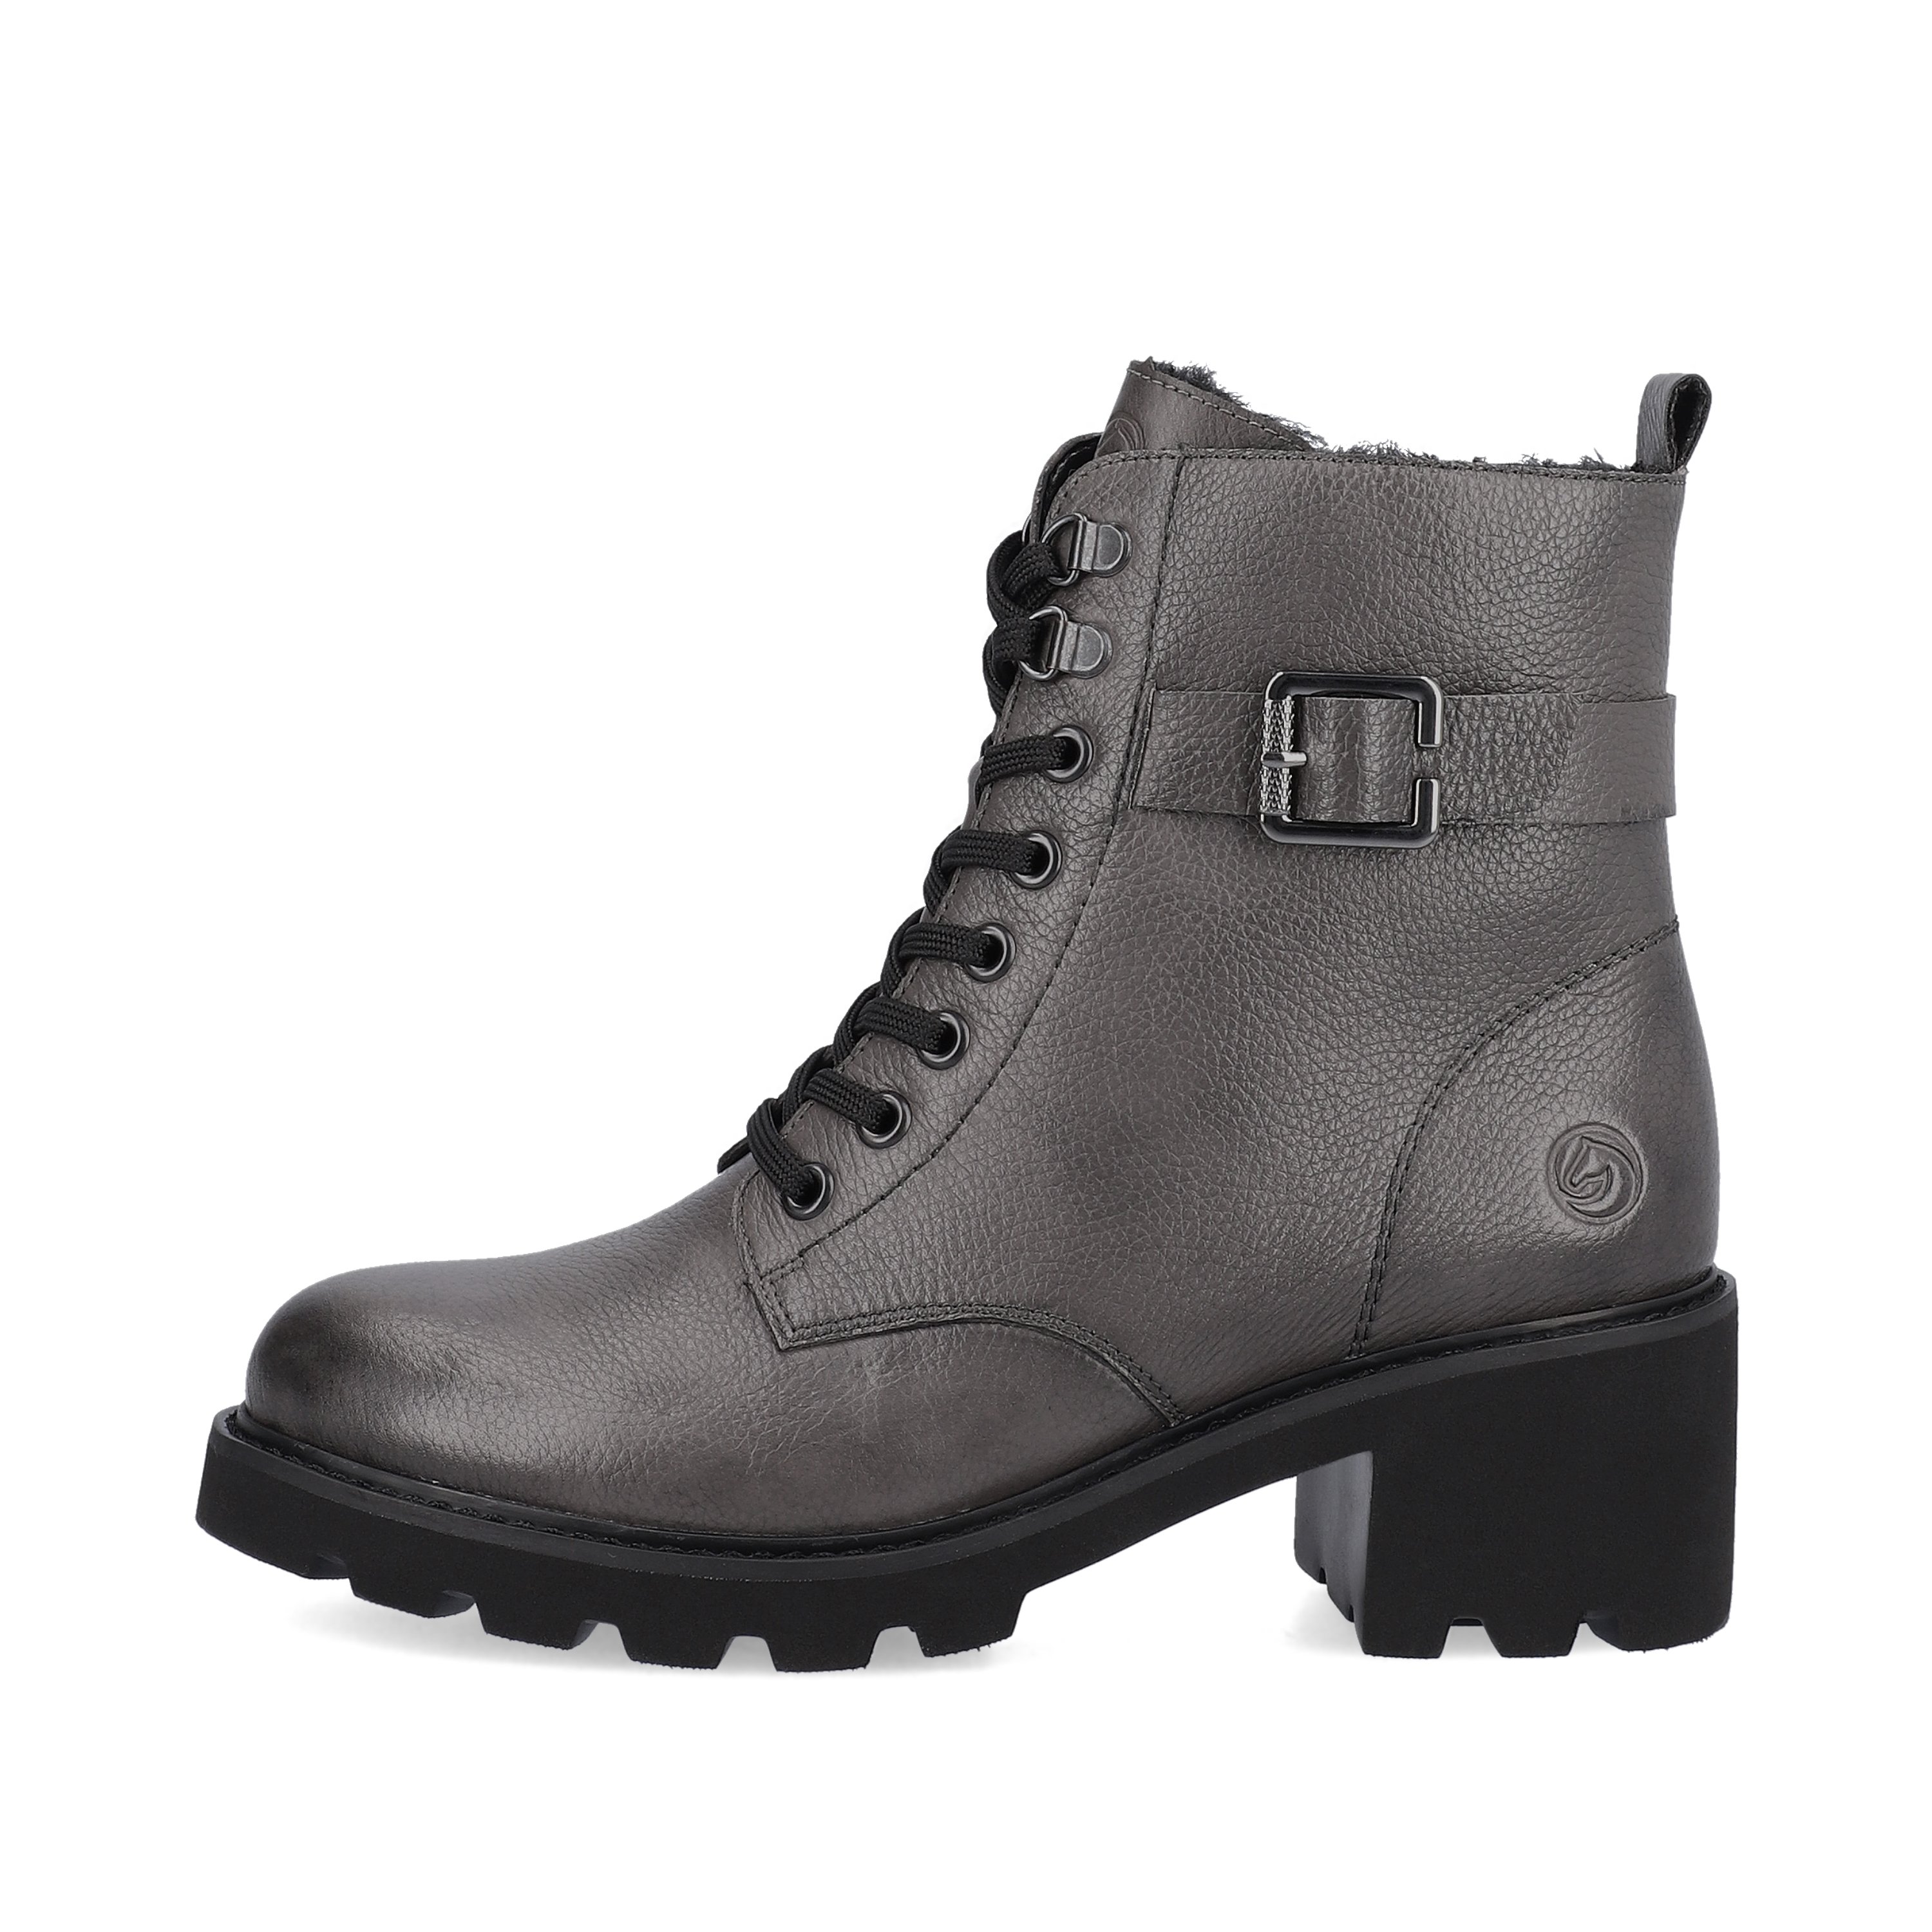 Granite grey remonte women´s biker boots D0A74-45 with especially light sole. The outside of the shoe